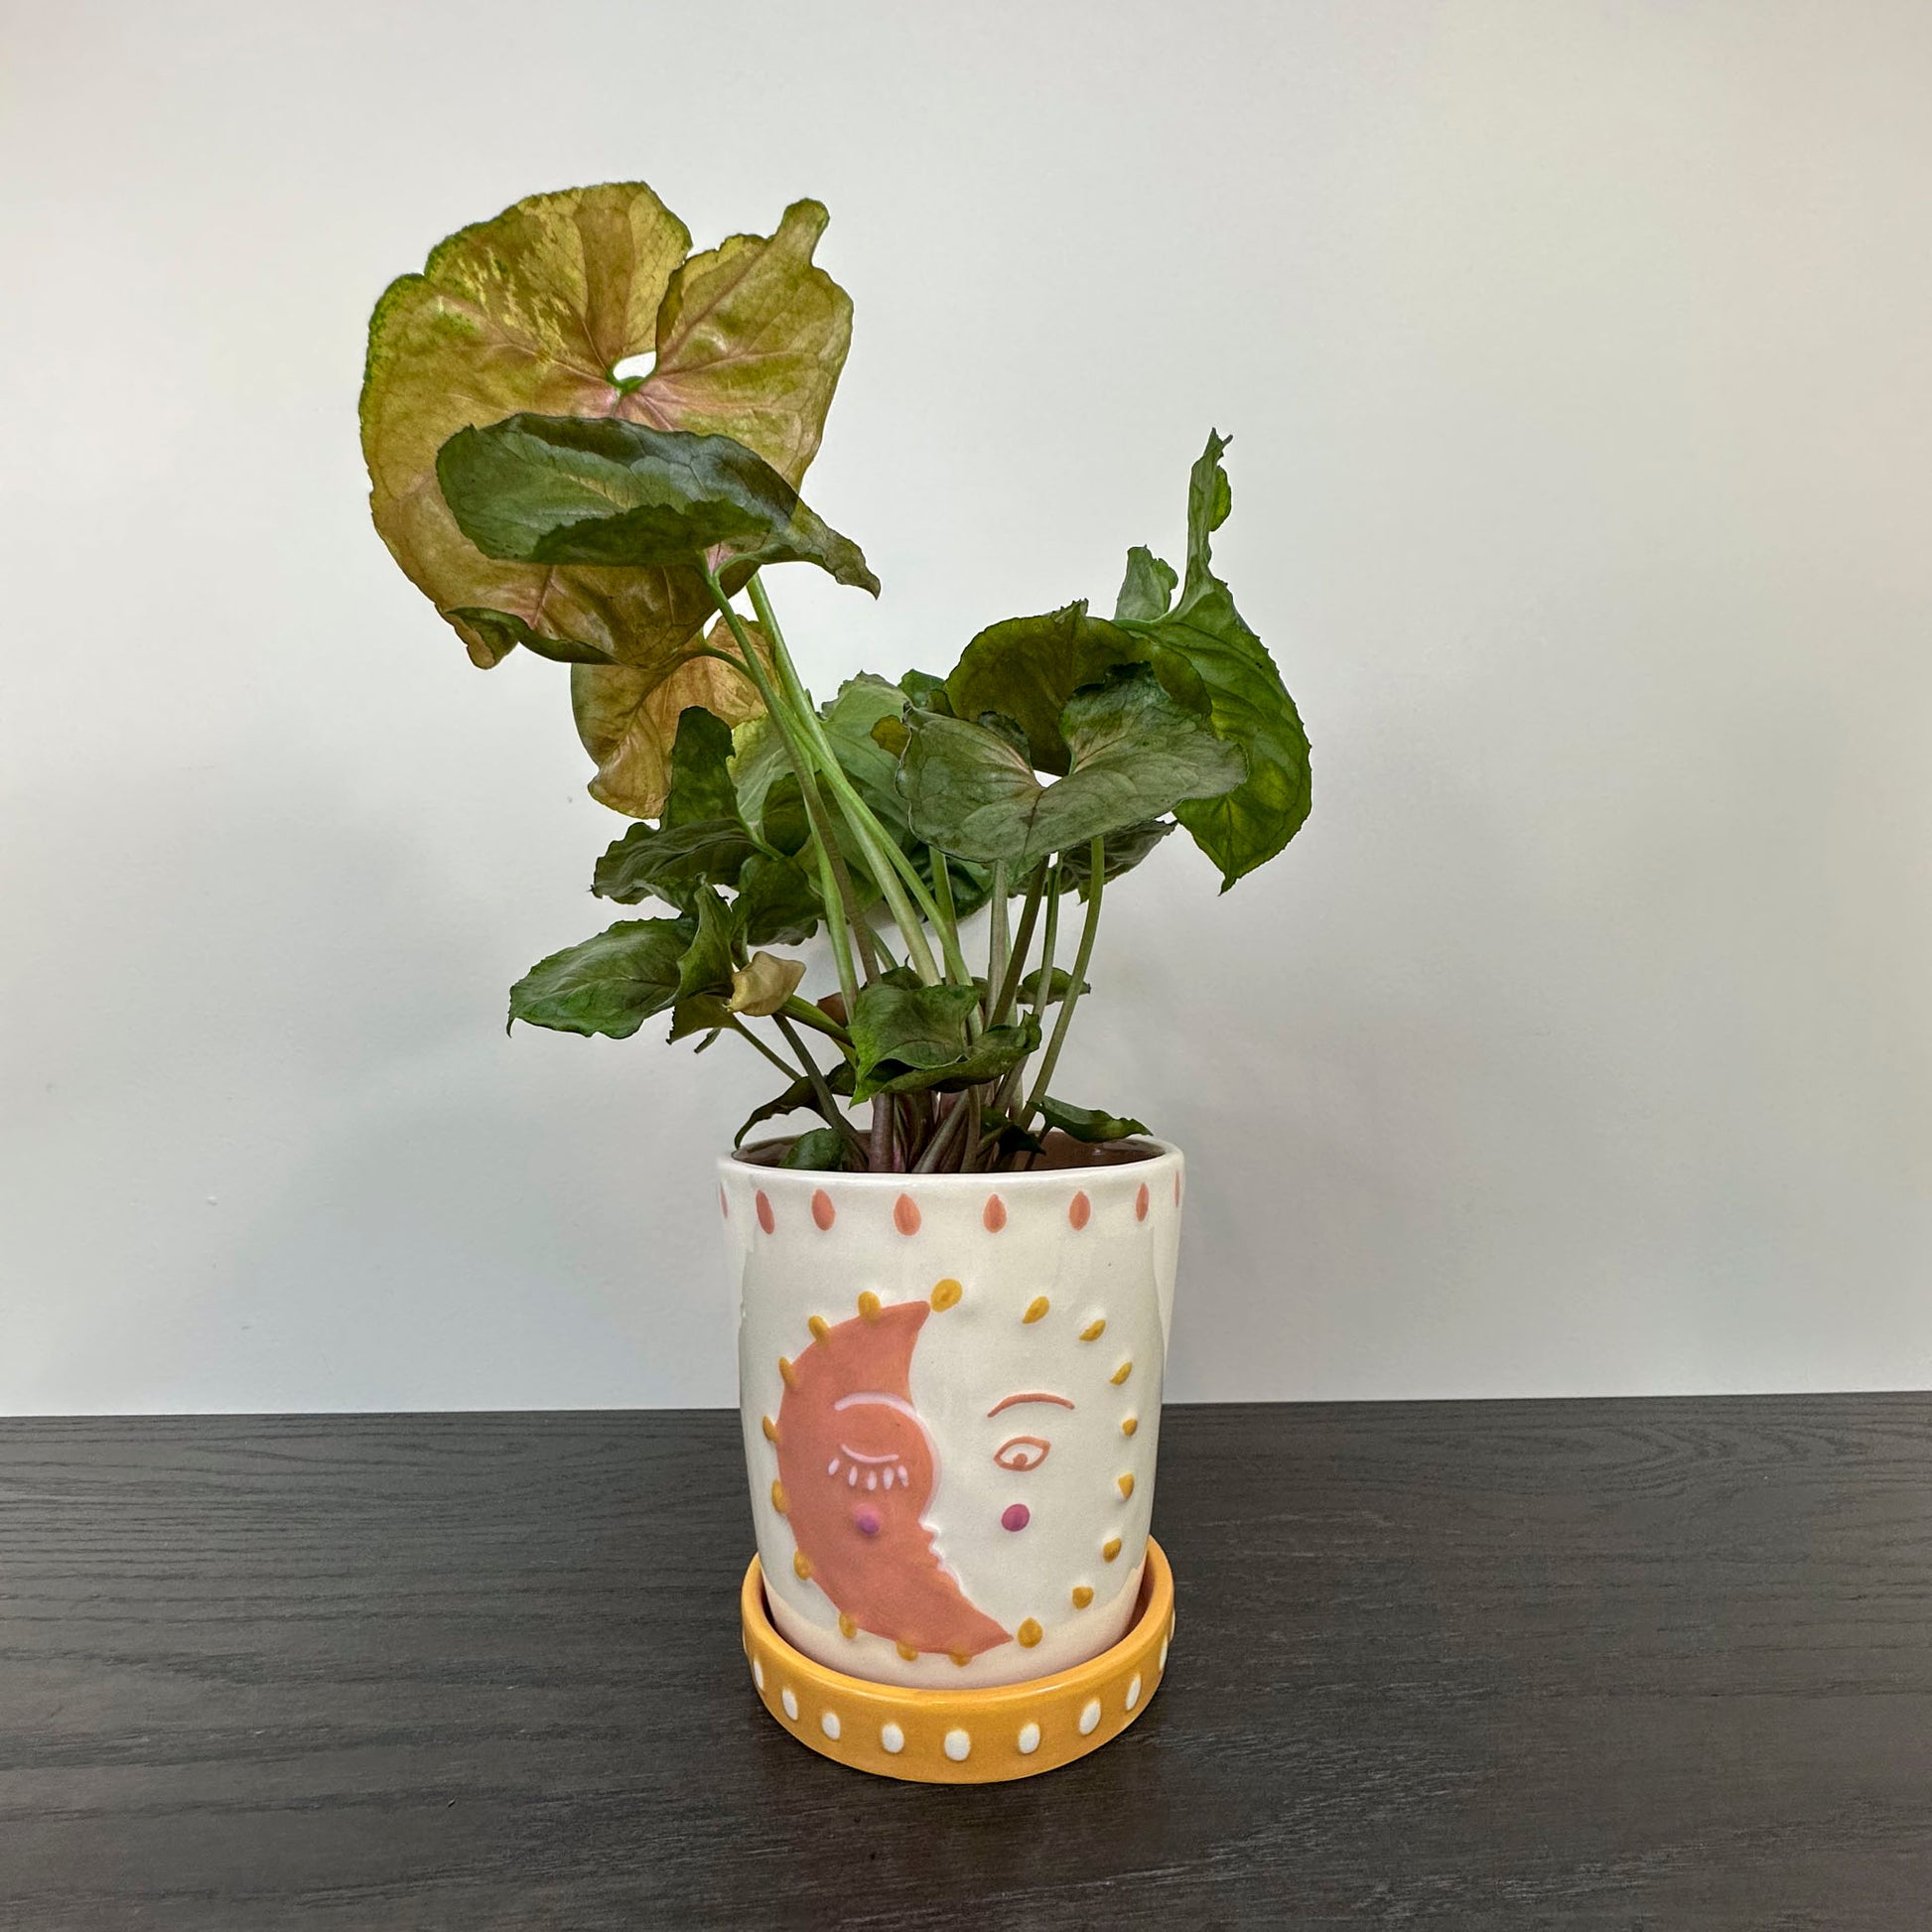 Sun and moon face planter holding a syngonium